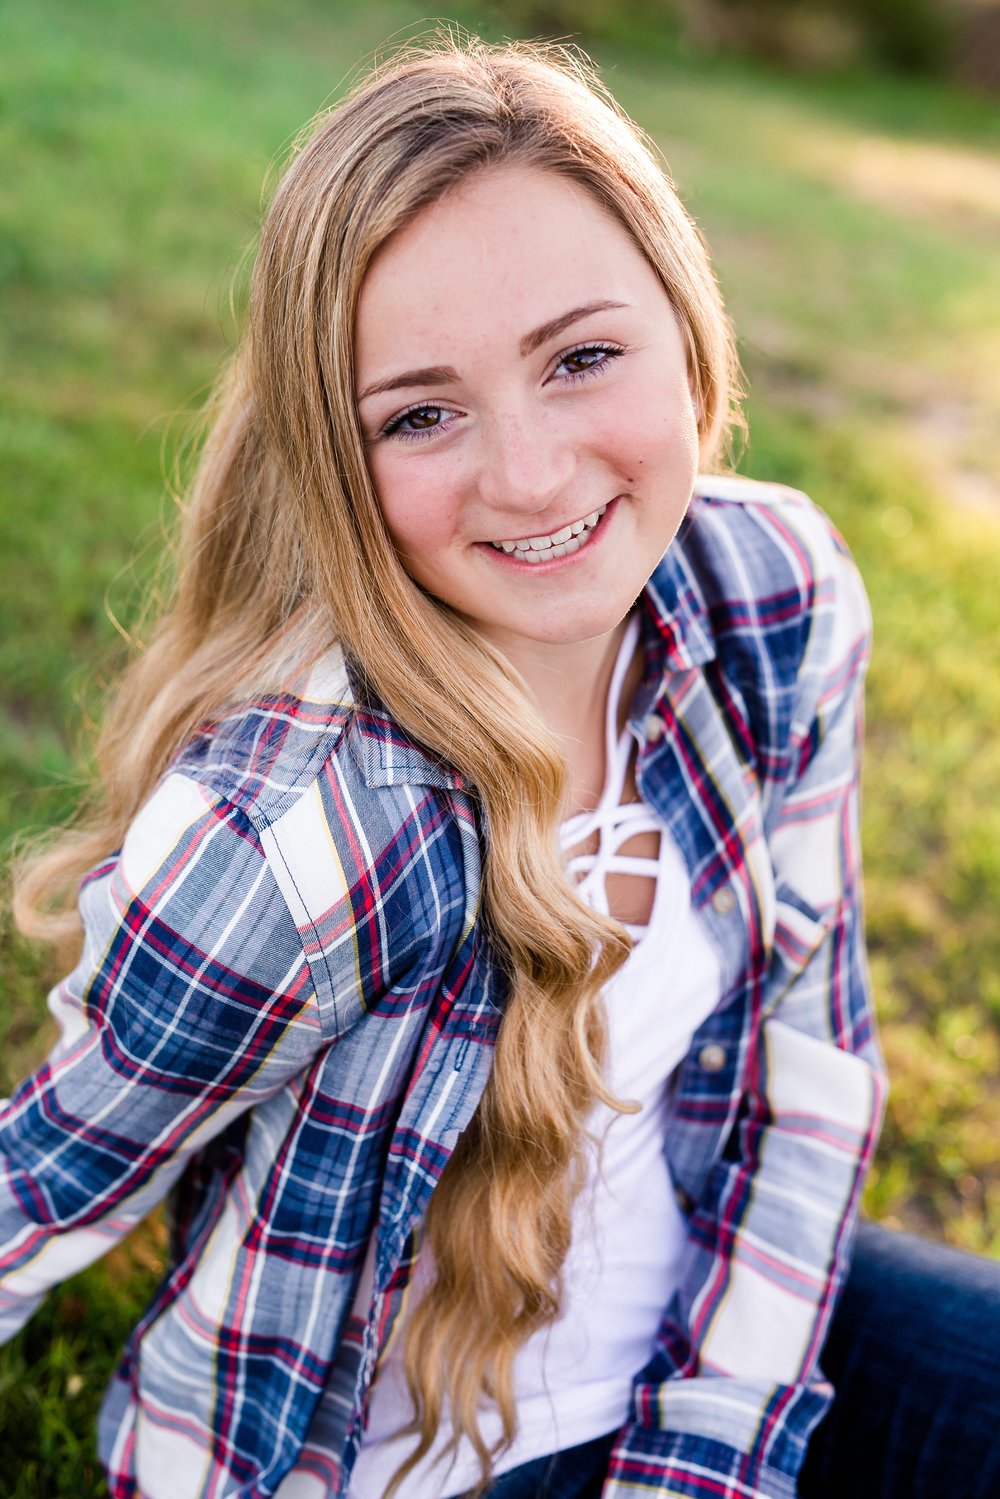 Country Styled High School Senior Pictures on a Farm and Little Cormorant Lake in Minnesota by Amber Langerud with Grass Background